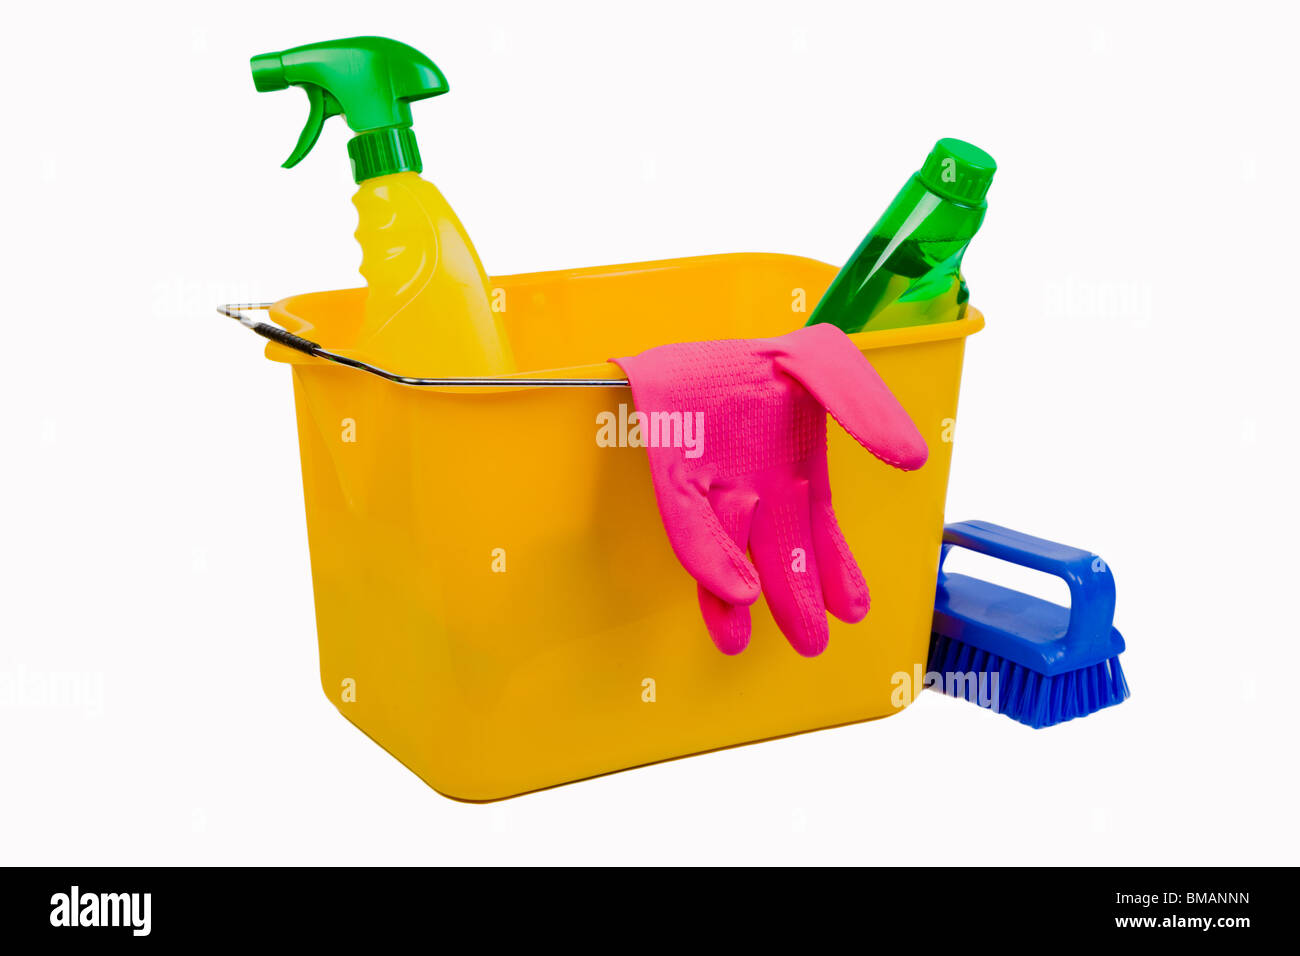 Cleaning materials Stock Photo